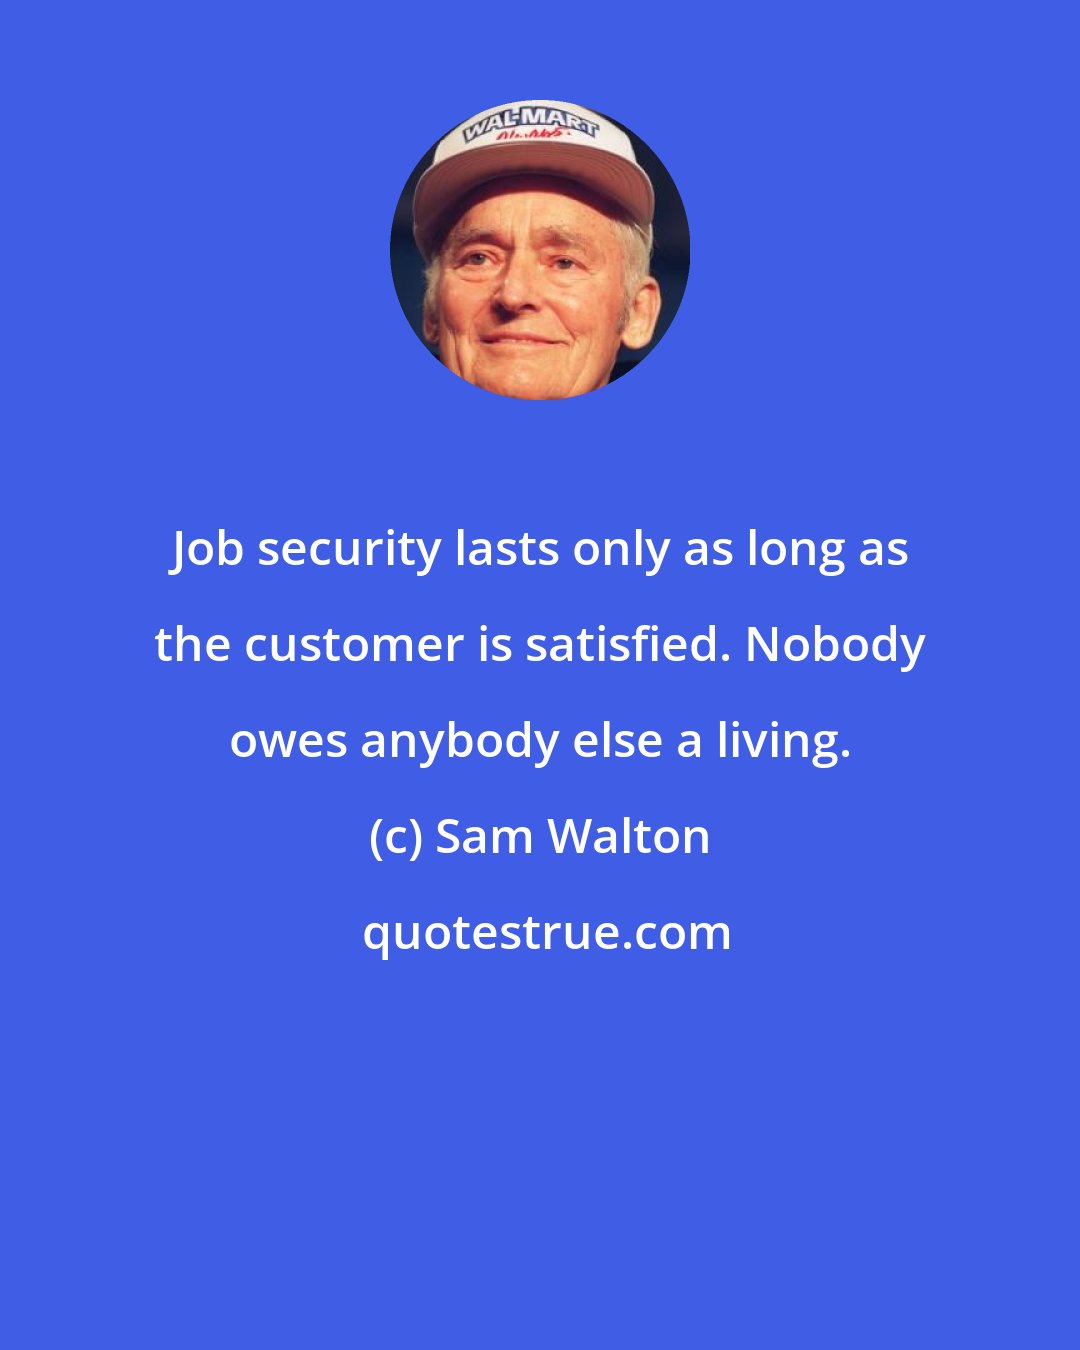 Sam Walton: Job security lasts only as long as the customer is satisfied. Nobody owes anybody else a living.